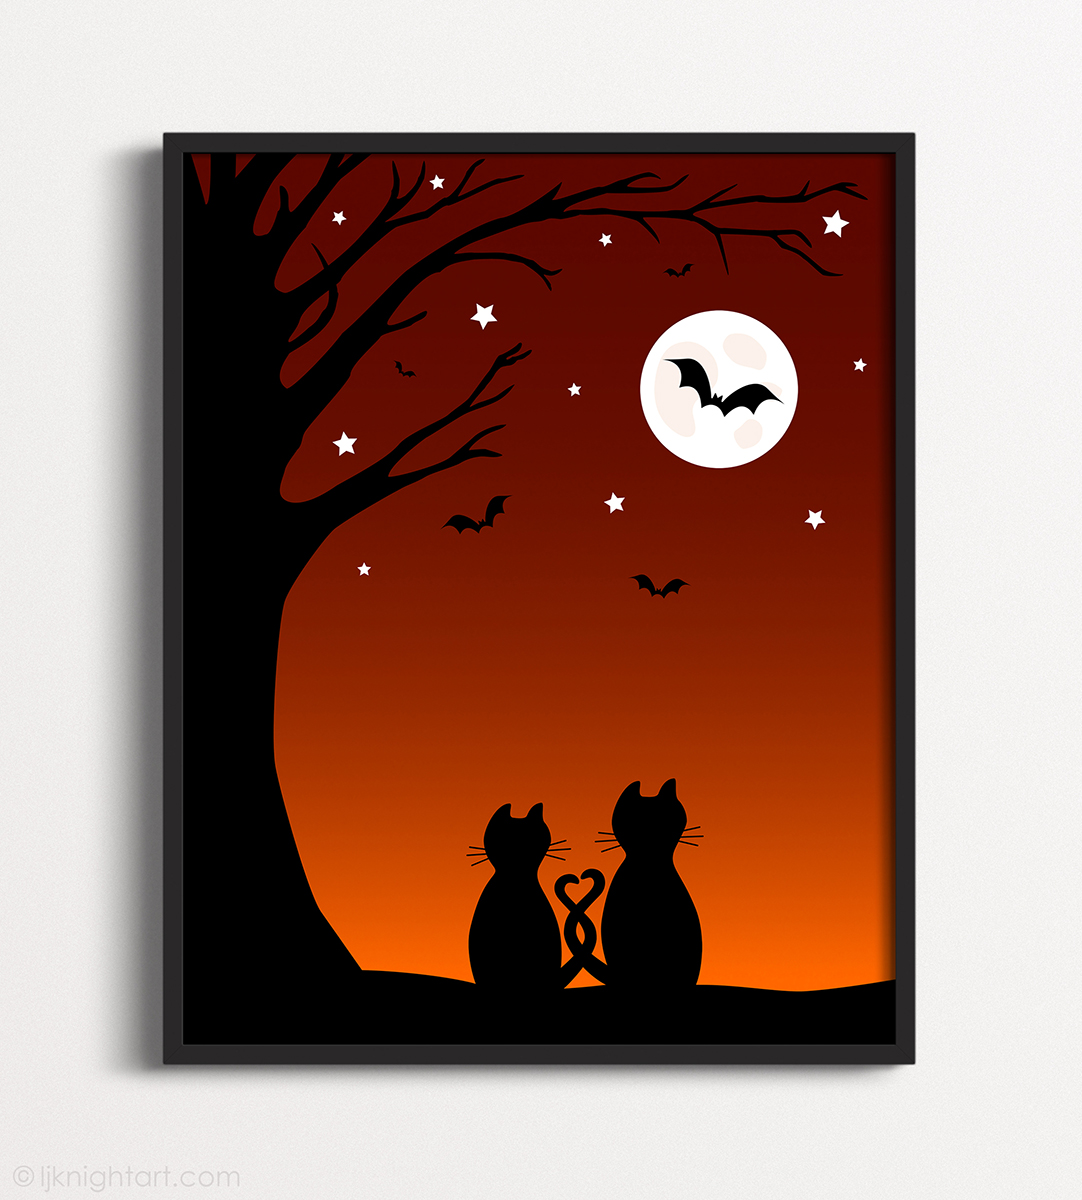 Framed art print with Halloween illustration of a silhouetted cat couple sitting under a tree looking at the moon, with an orange sky and flying bats